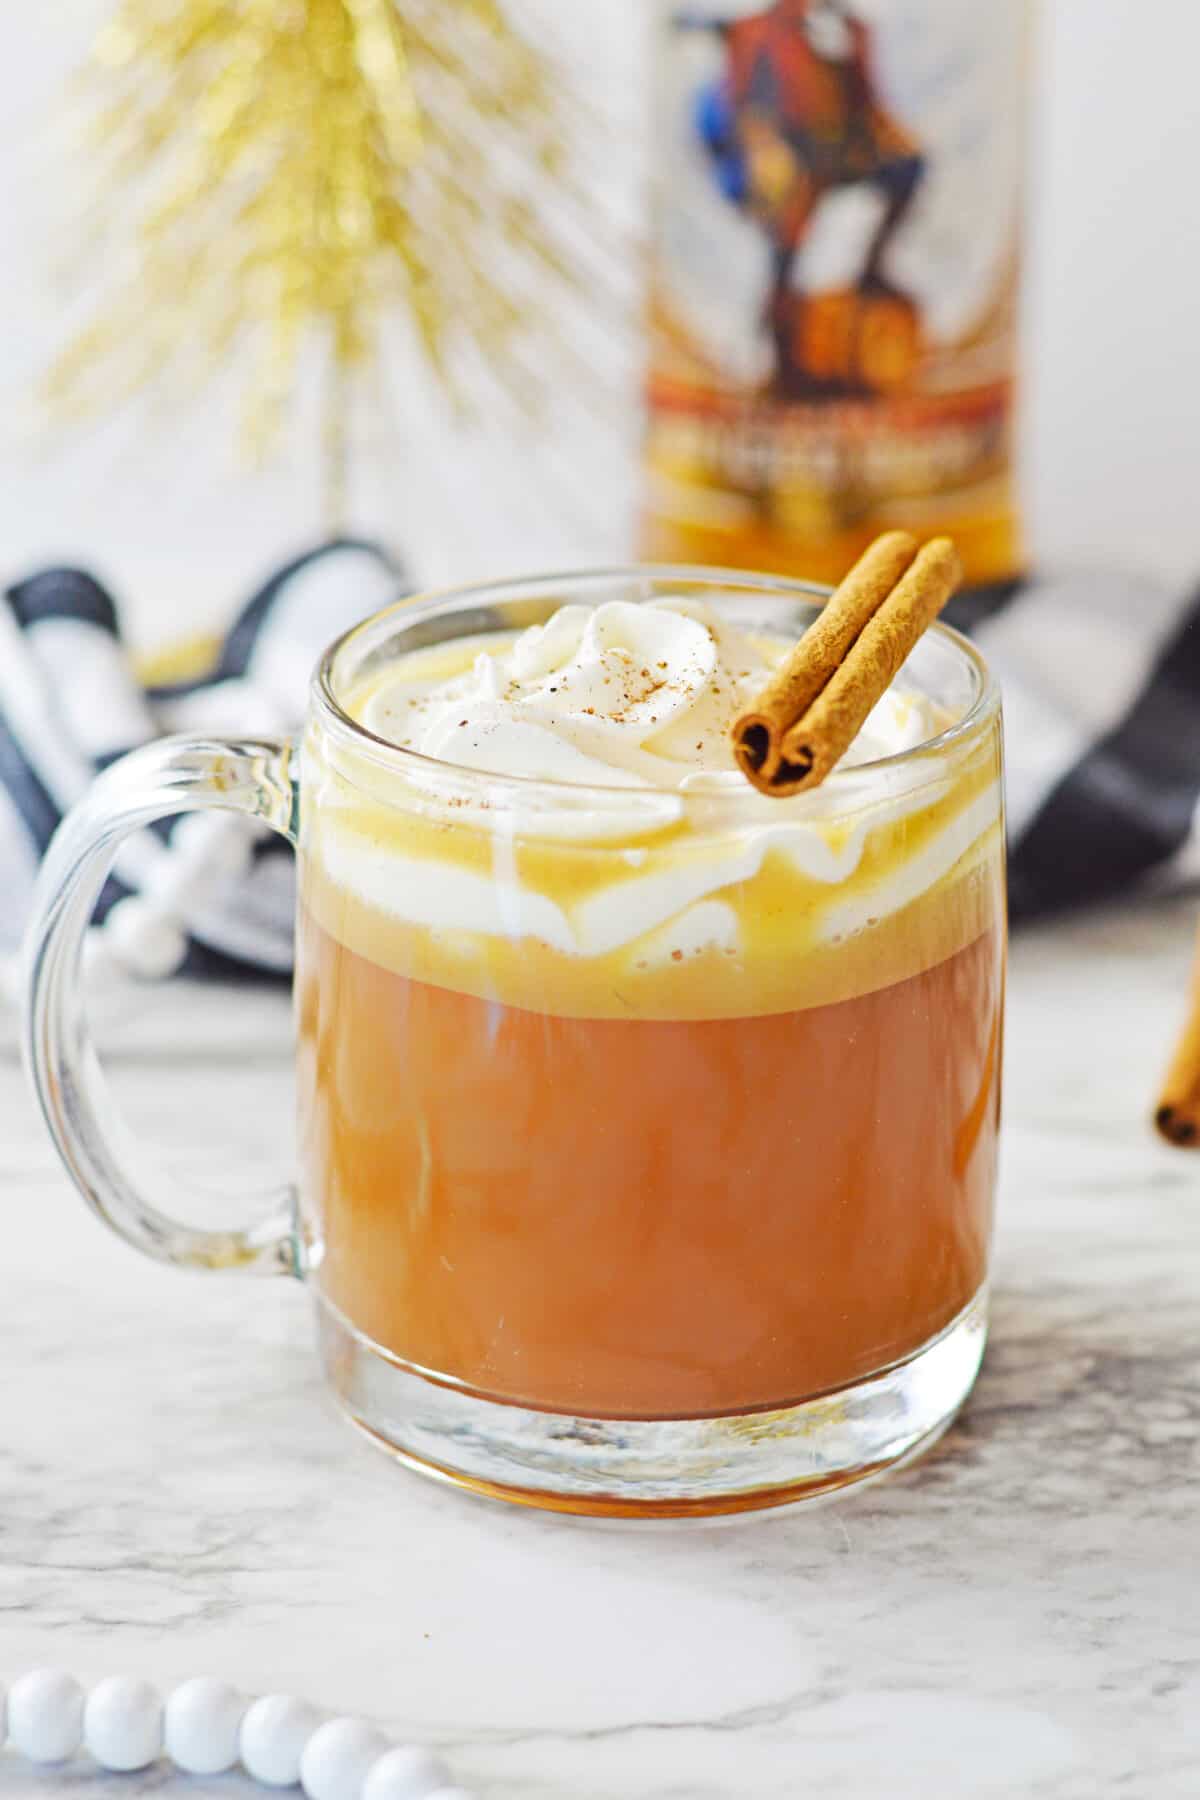 Hot buttered rum cocktail topped with whipped cream and a cinnamon stick in a glass mug with a bottle o spiced rum in the background.